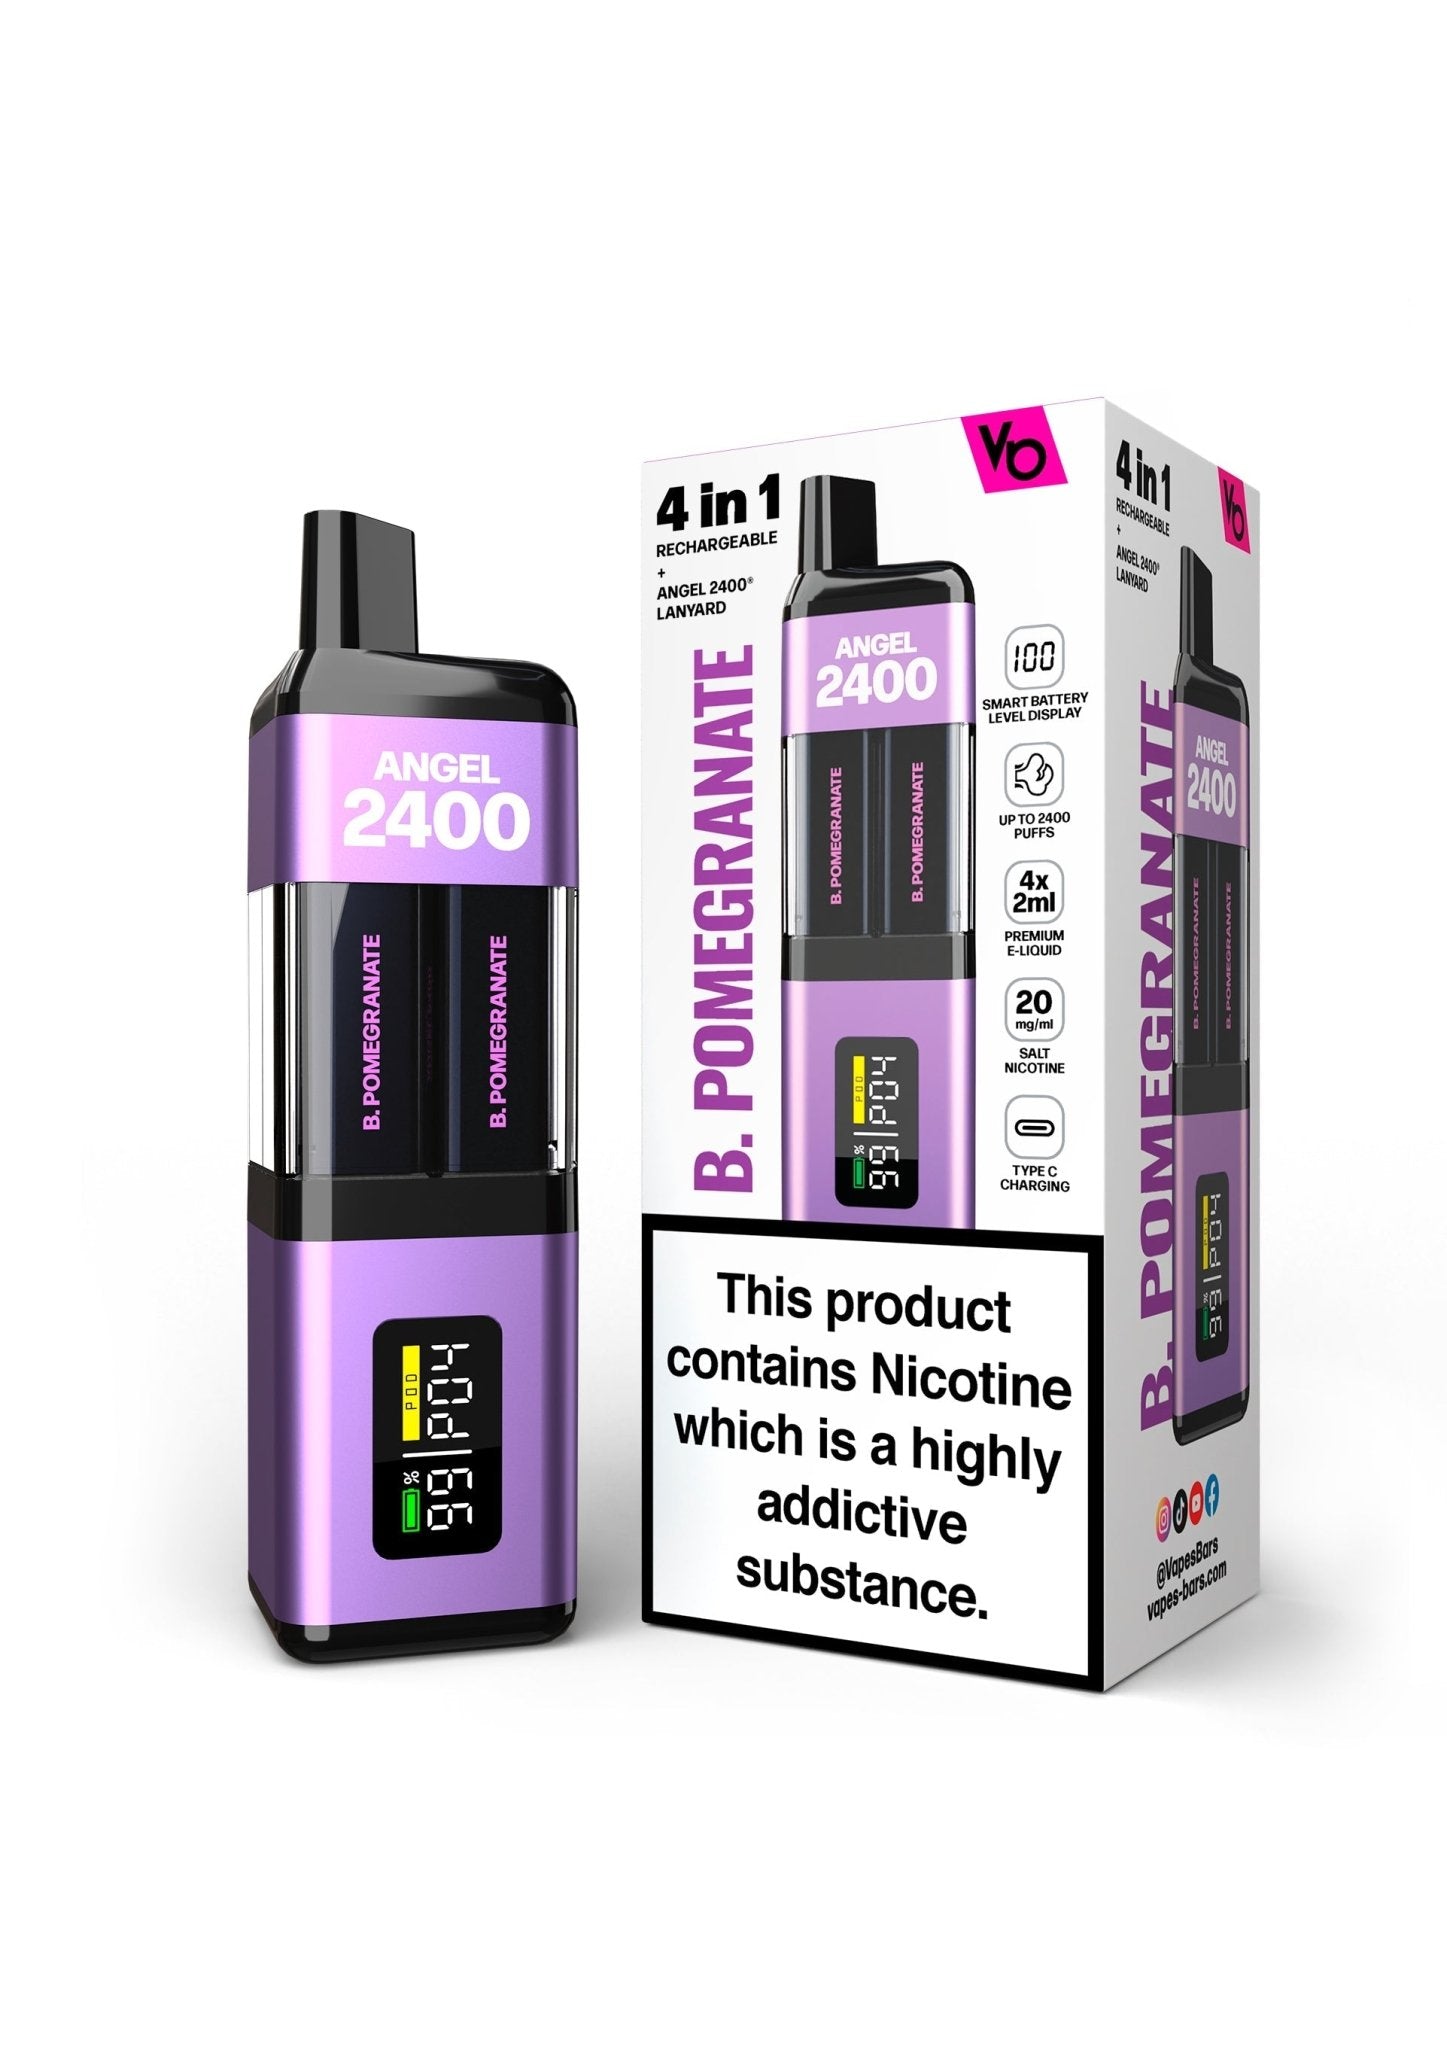 Angel 2400 Puffs Disposble Vape by Vapes Bars (Pack of 5) - Wolfvapes.co.uk-Blueberry Pomegranate